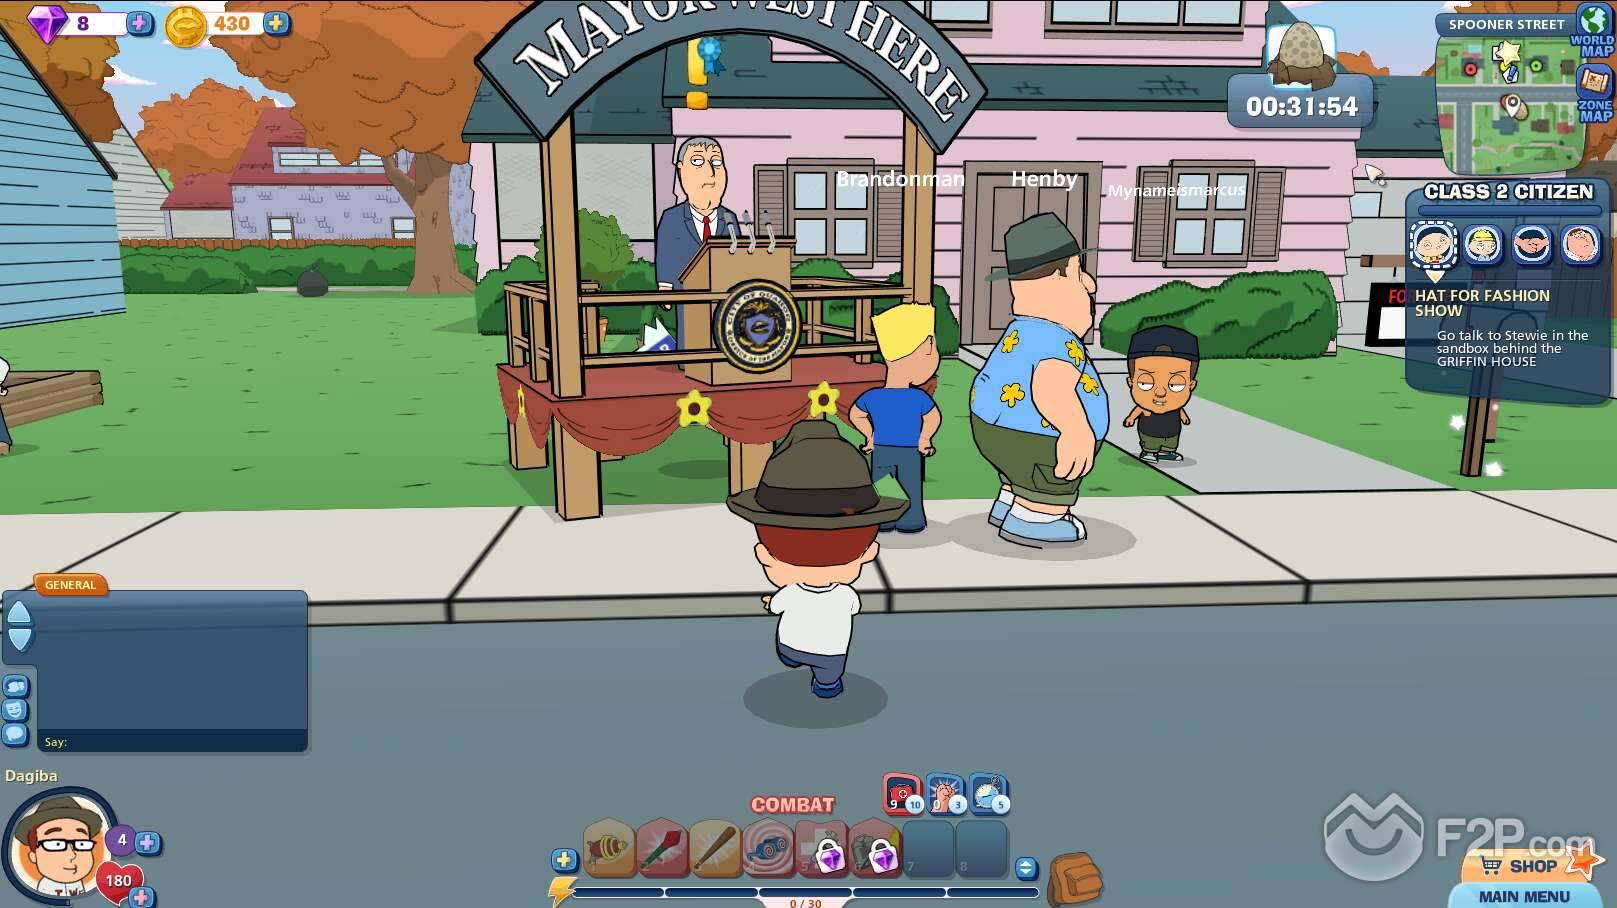 Family Guy Online Could Be Returning!! (Family Guy Browser MMO